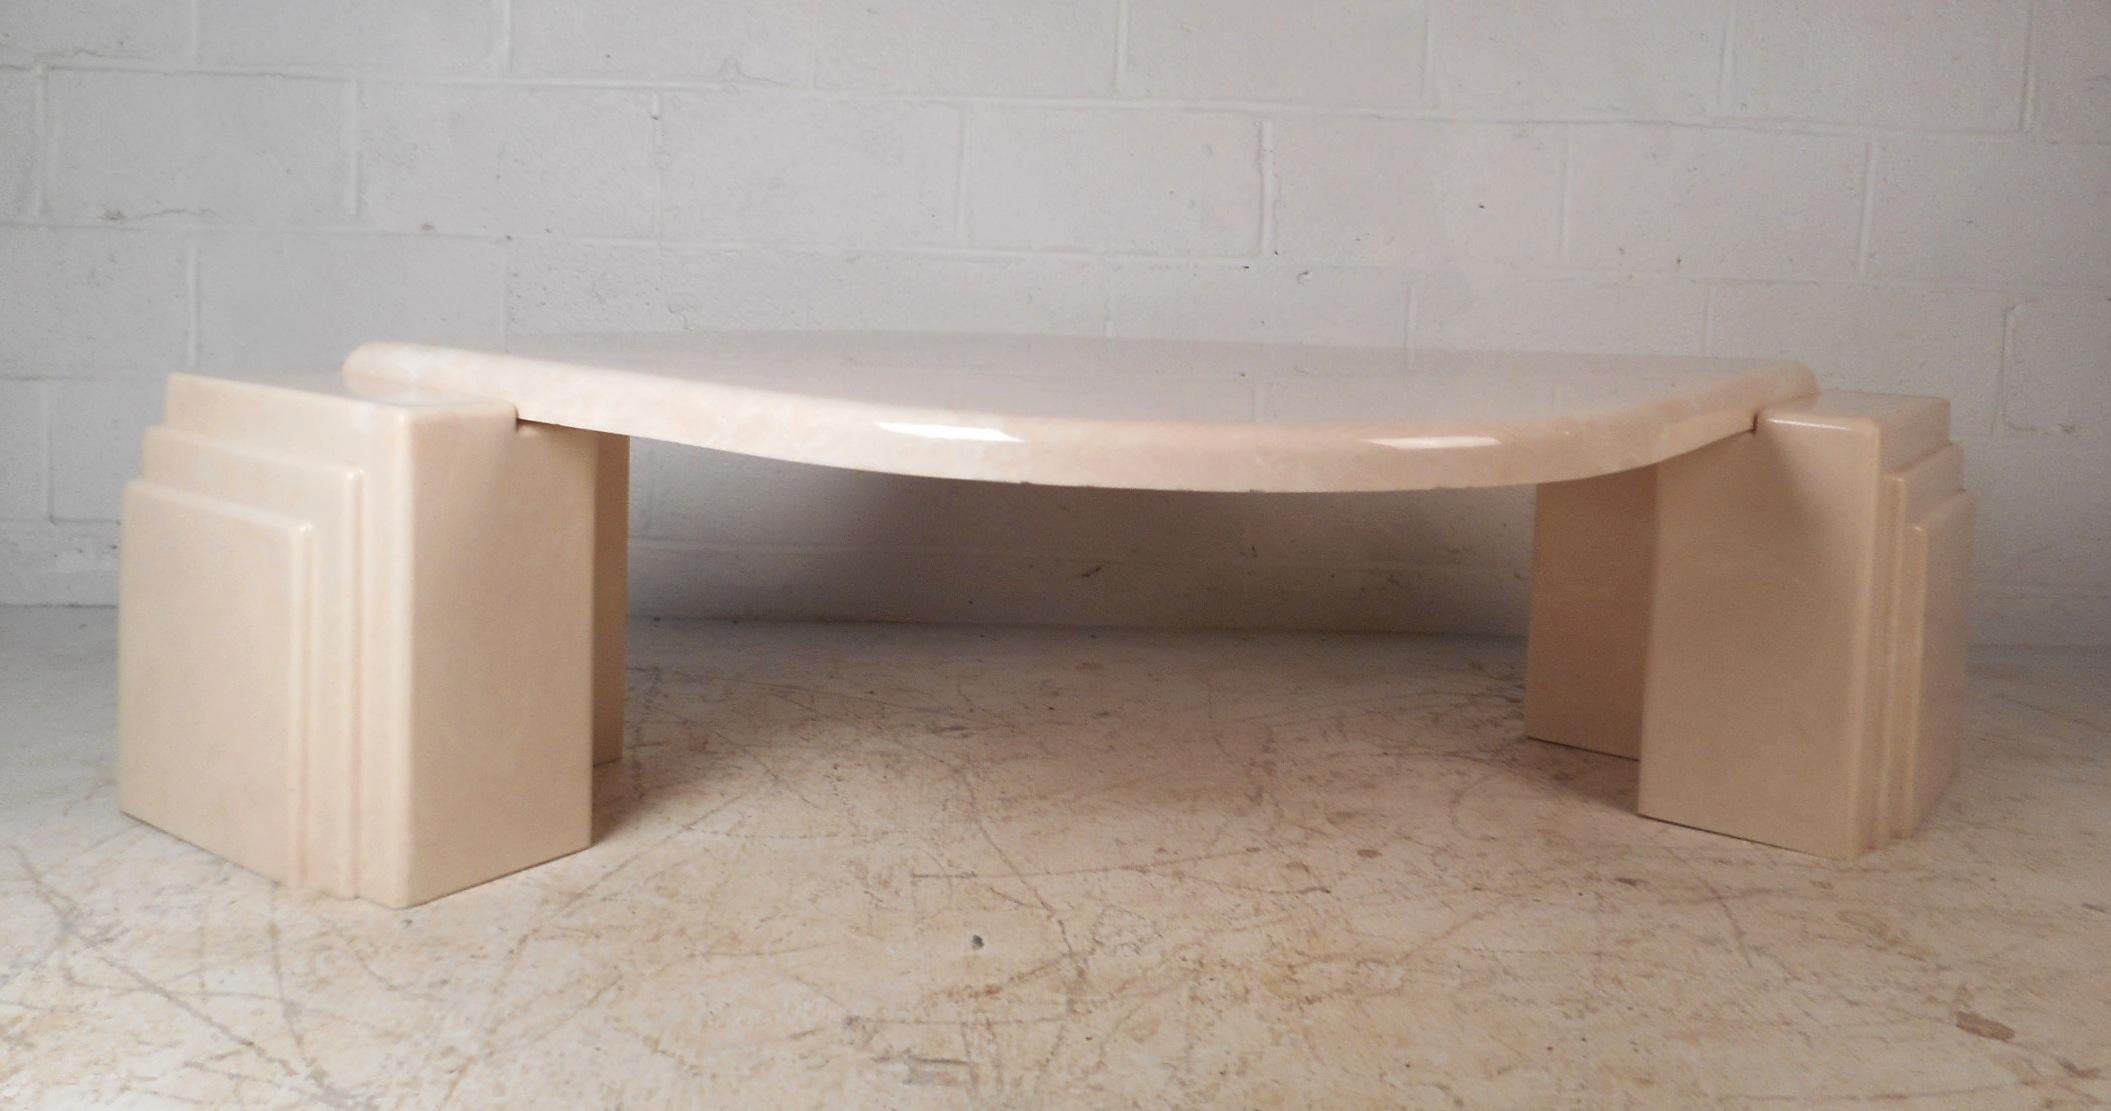 This gorgeous vintage modern coffee table features a uniquely shaped top with two sculptural supports on each side. The unusual tear drop shaped table top and beautiful off-white color adds to the allure. A sleek design that is sure to make a